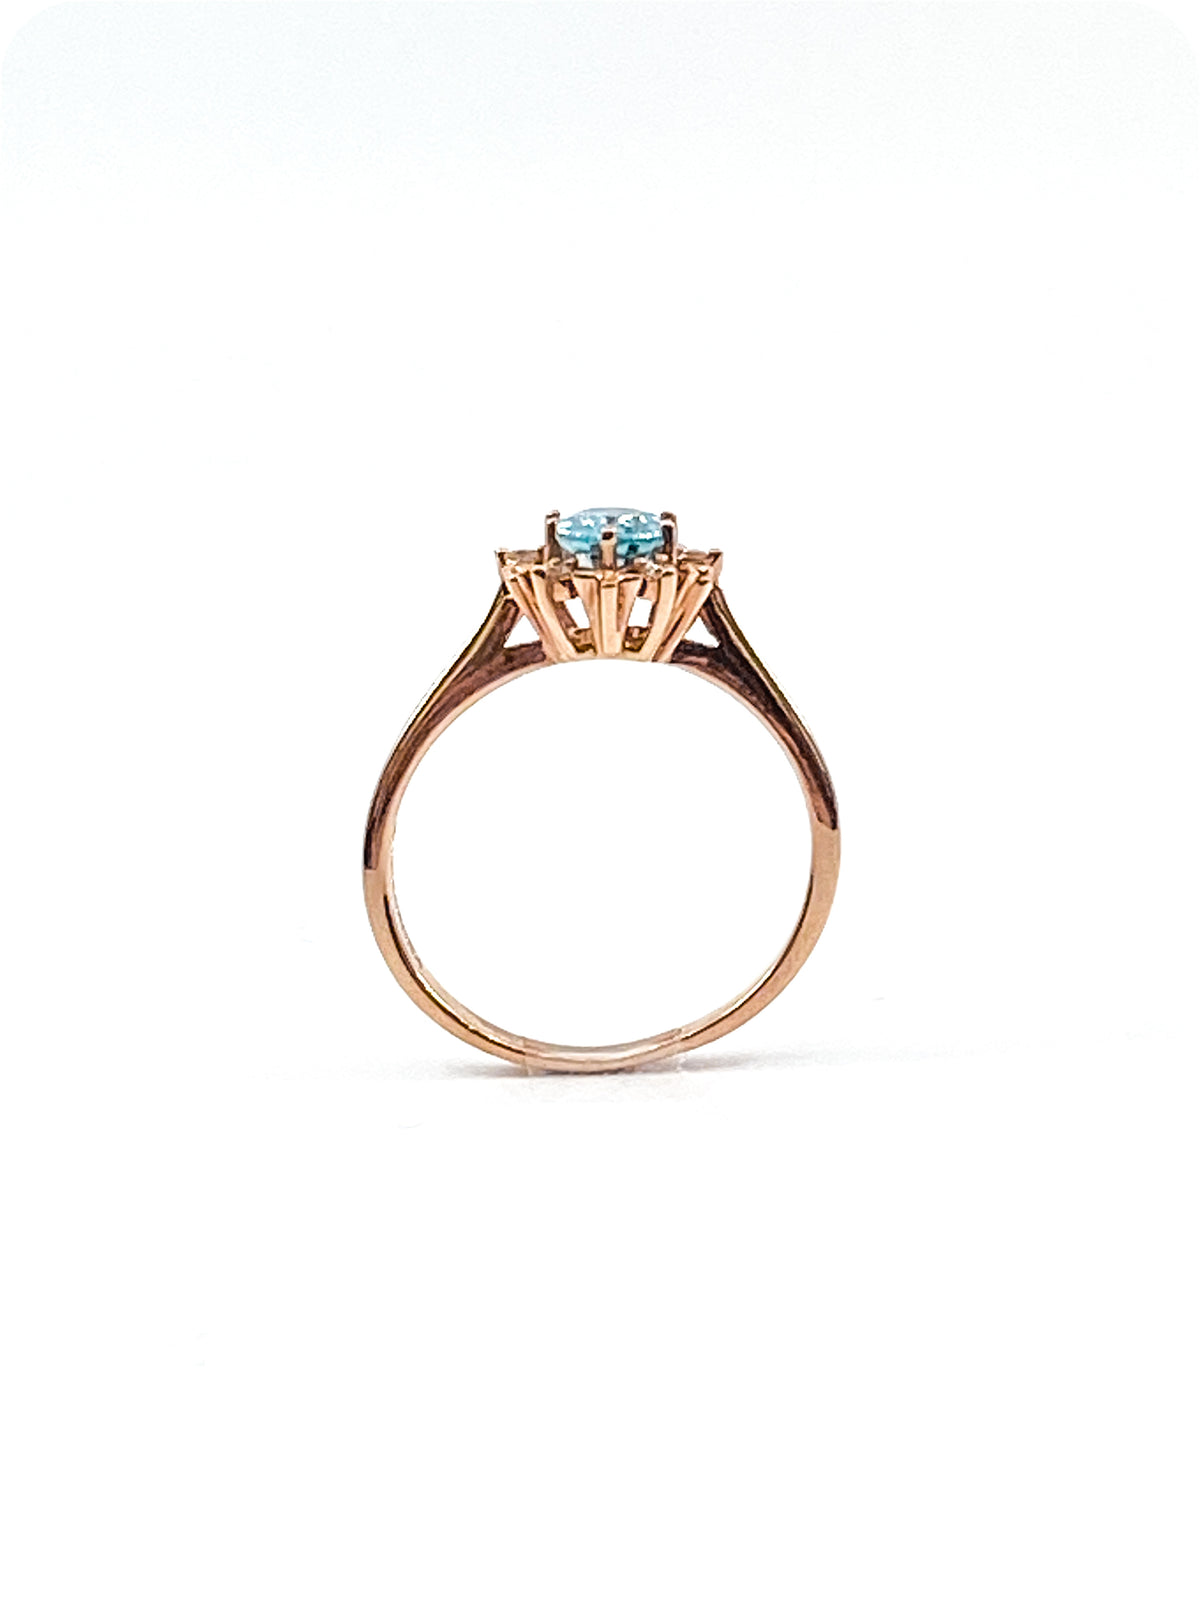 10K Rose Gold 1.20cttw Genuine Oval Cut Blue Zircon and 0.09cttw Diamond Halo Ring, size 7